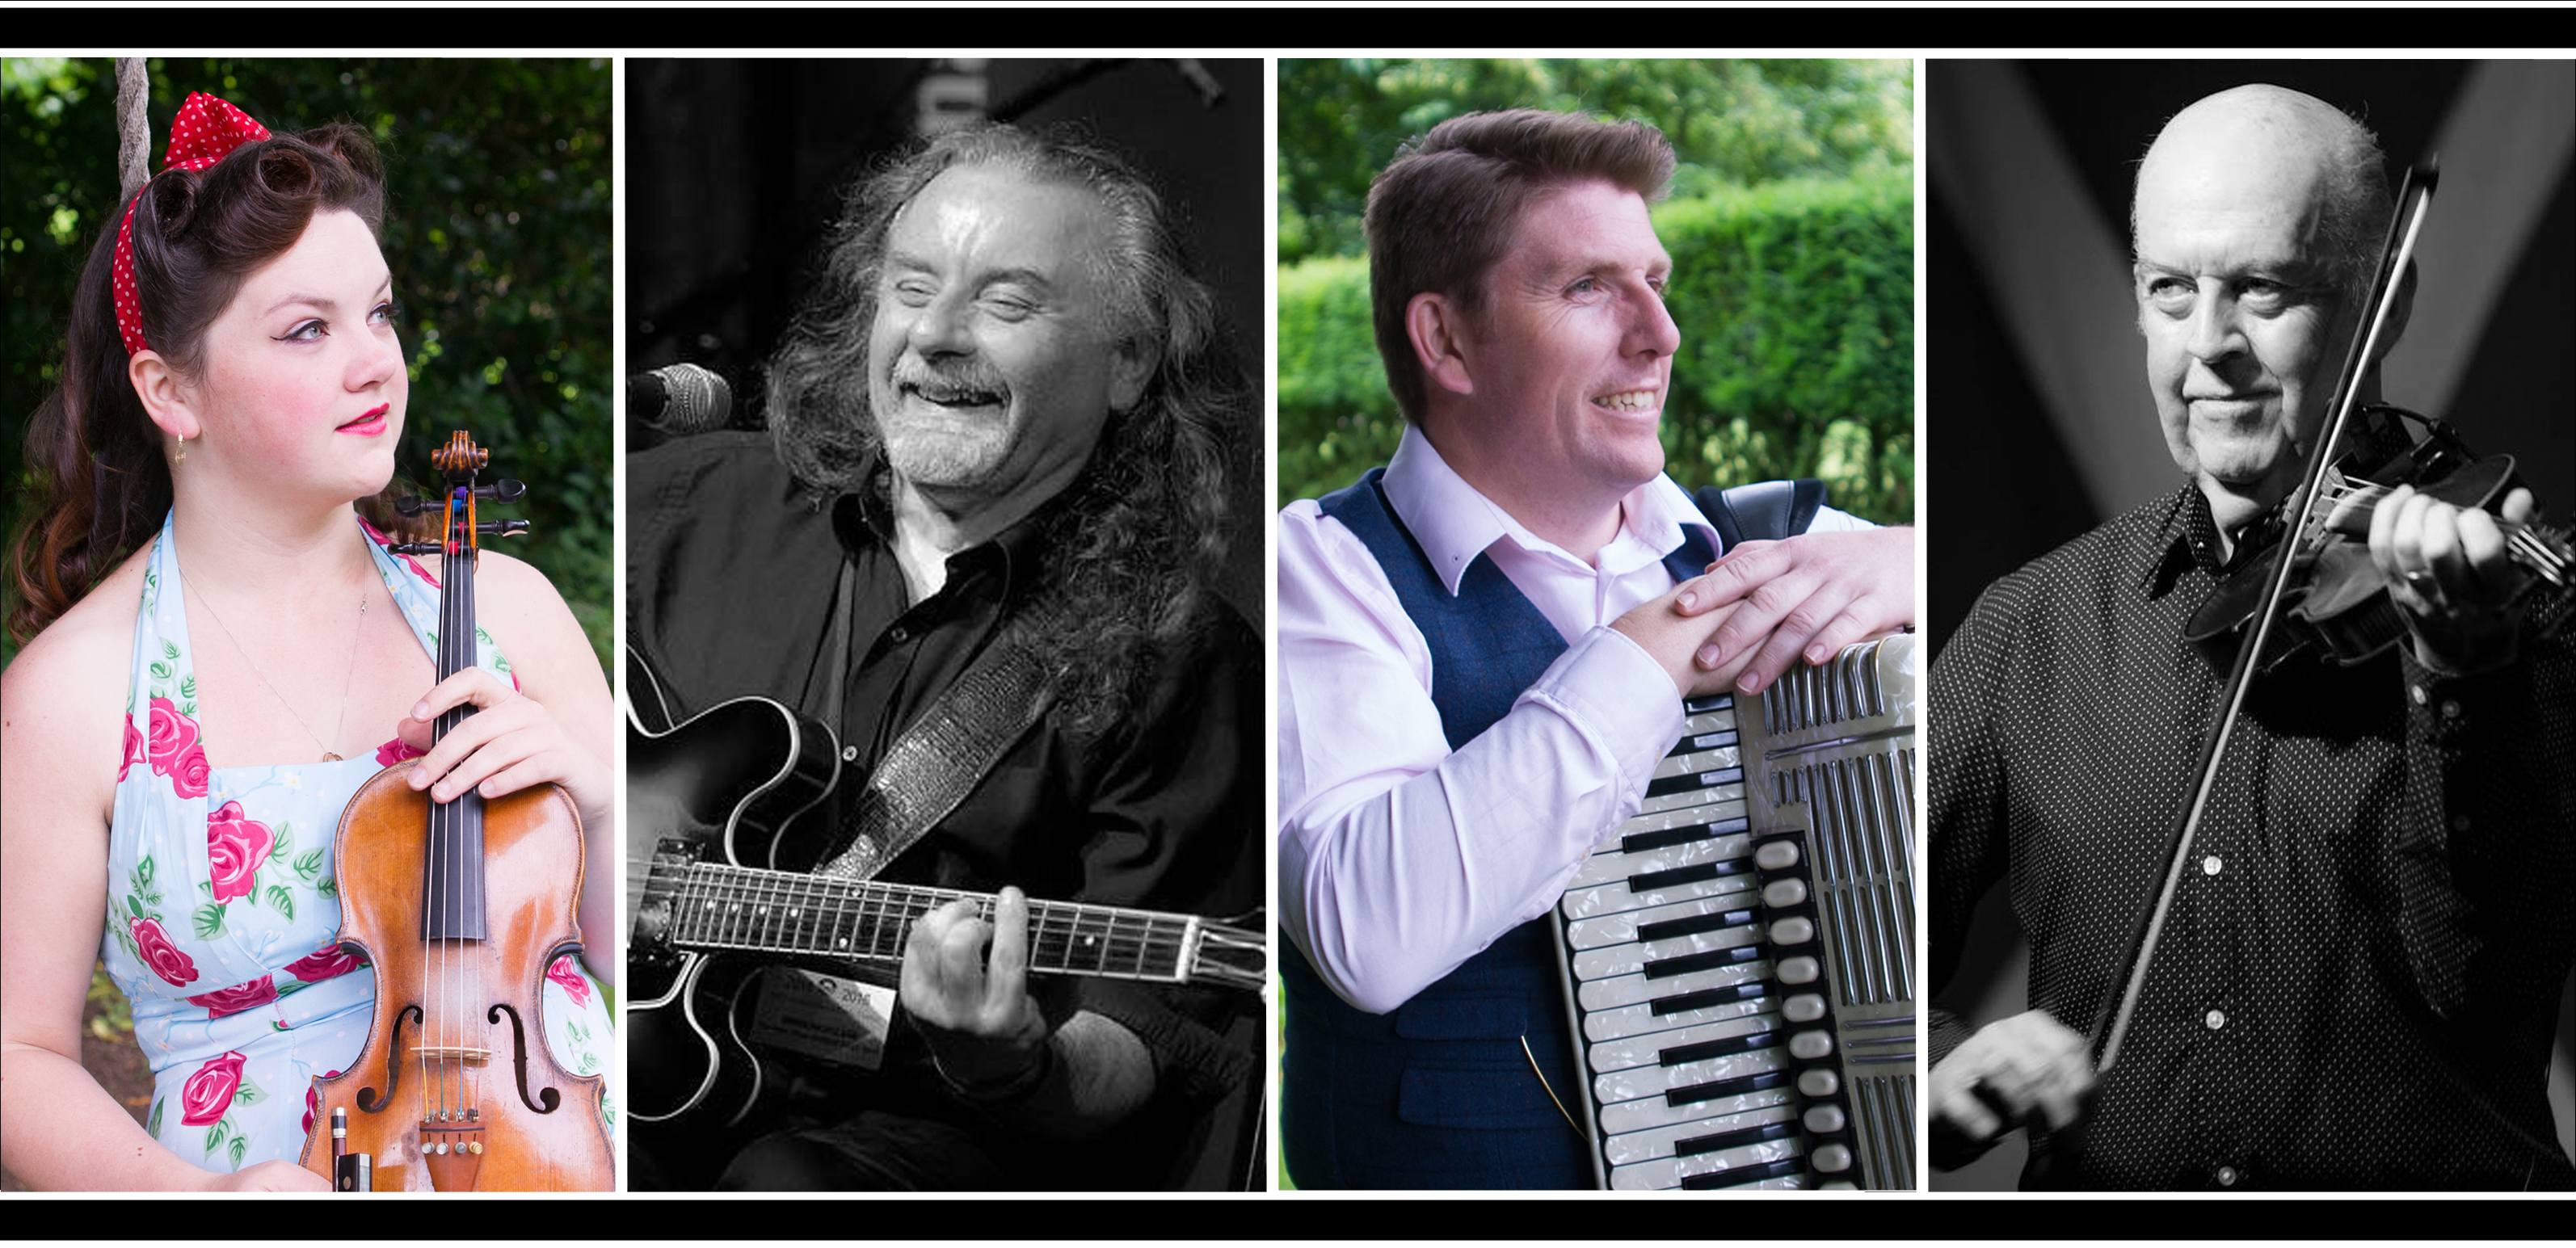 Full Tilt, which brings together the musical talents of Gemma Donald, Brian Nicholson, Alan Small and Manus McGuire, will be playing in the town on Friday, August 23.